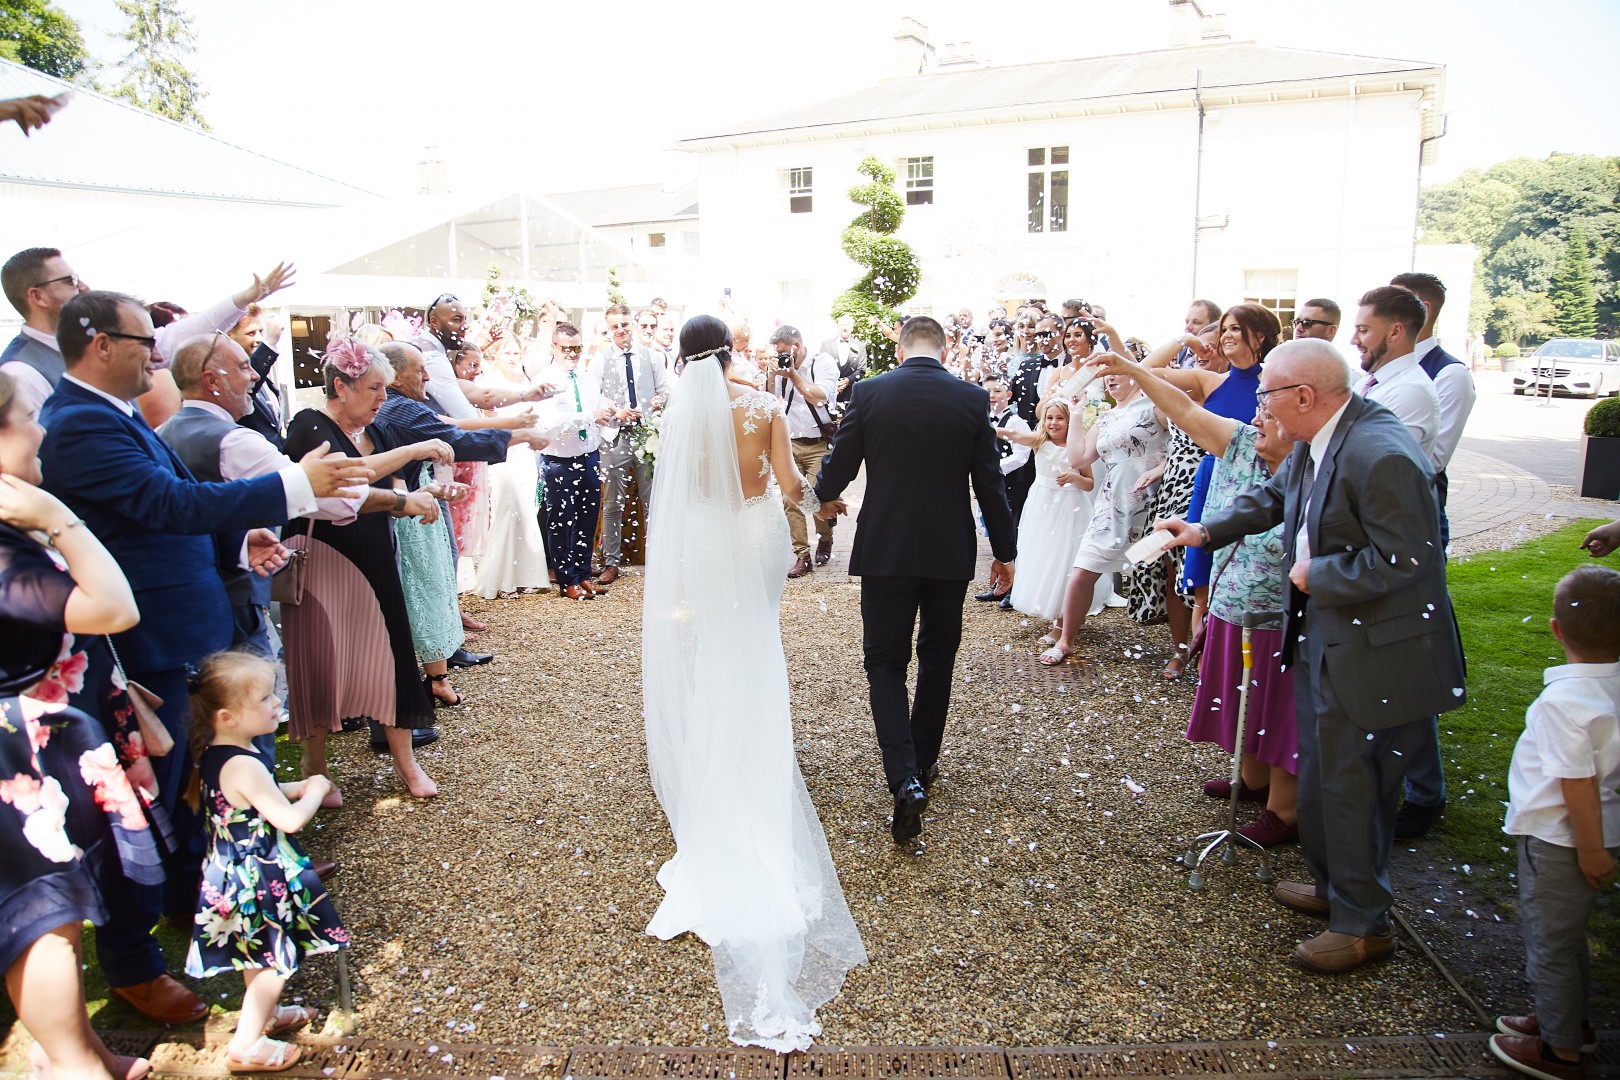 We had simply the best wedding day ever at Milsoms Kesgrave Hall, from start to finish.